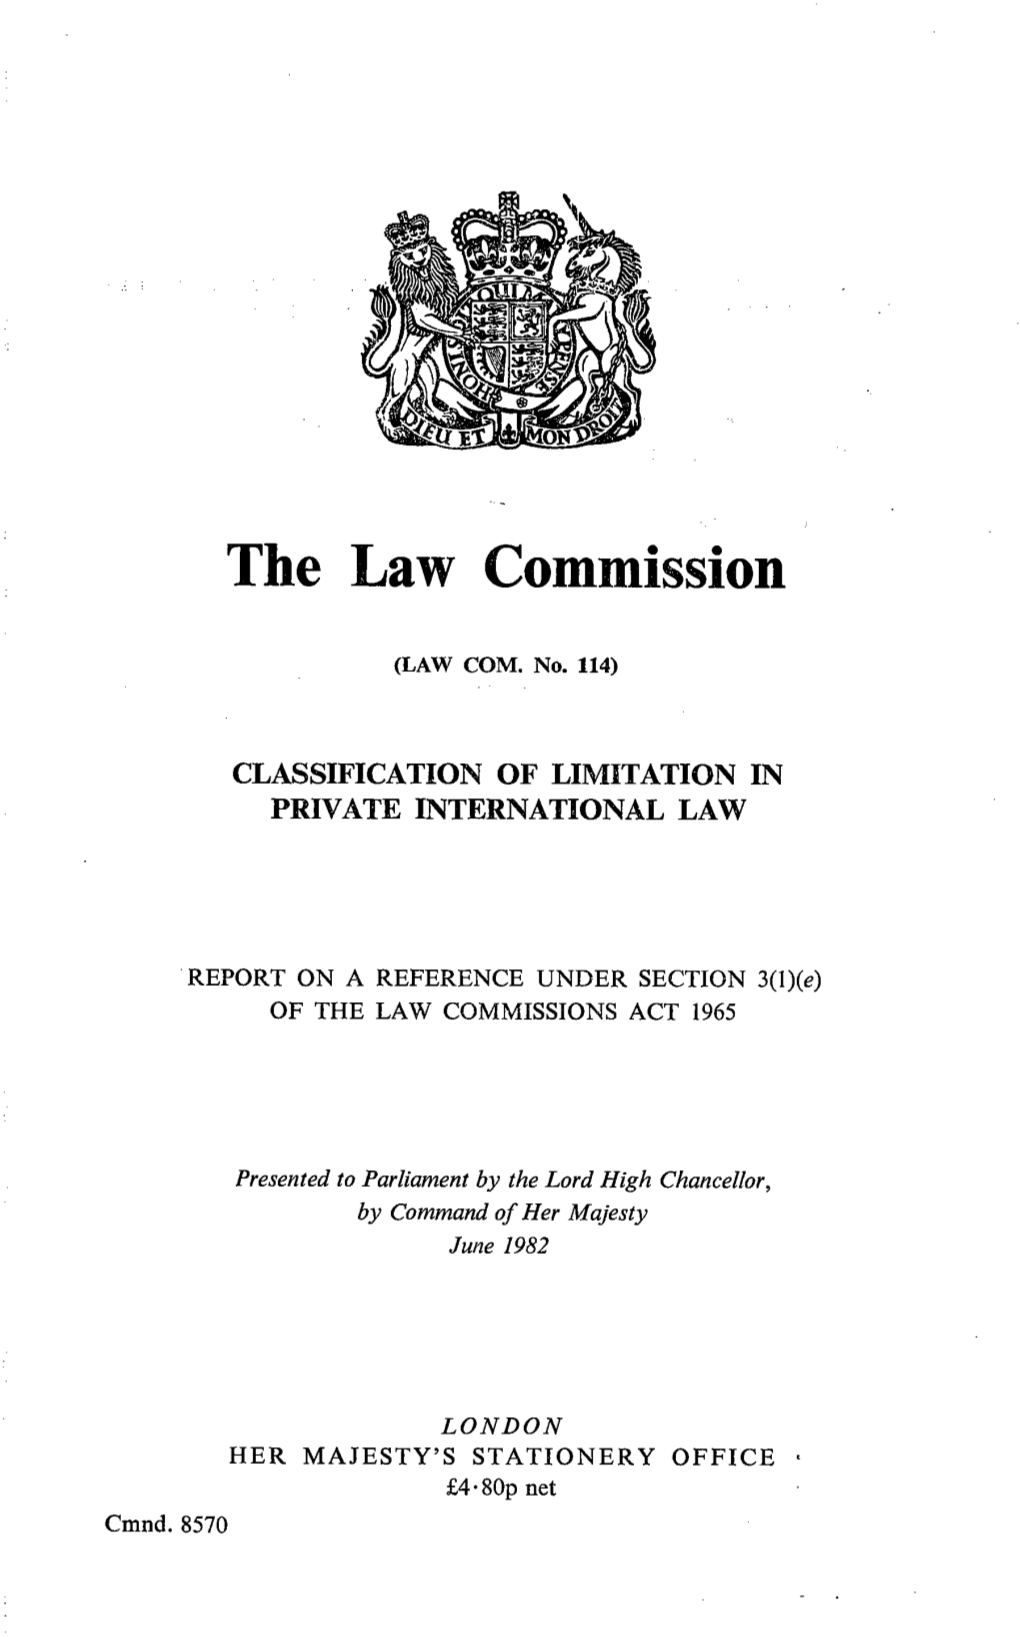 Classification of Limitation in Private International Law